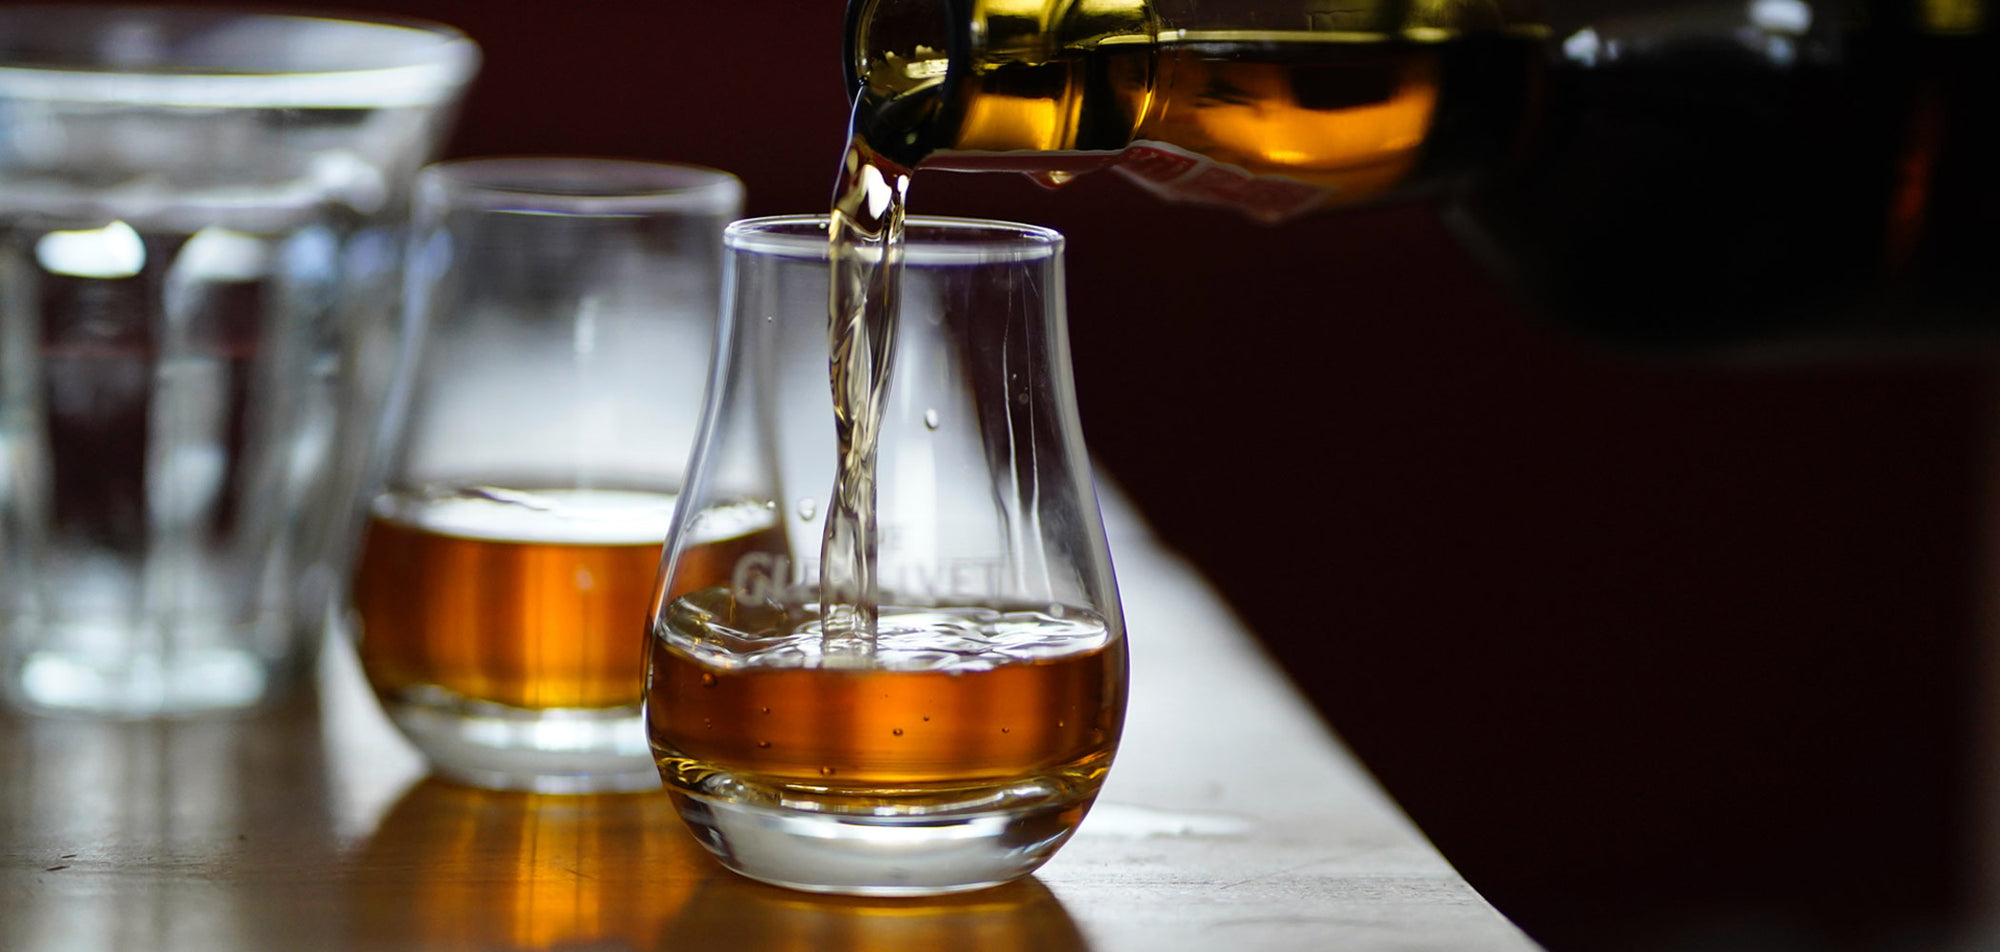 Bourbon, Whiskey and Scotch: What's the Difference?